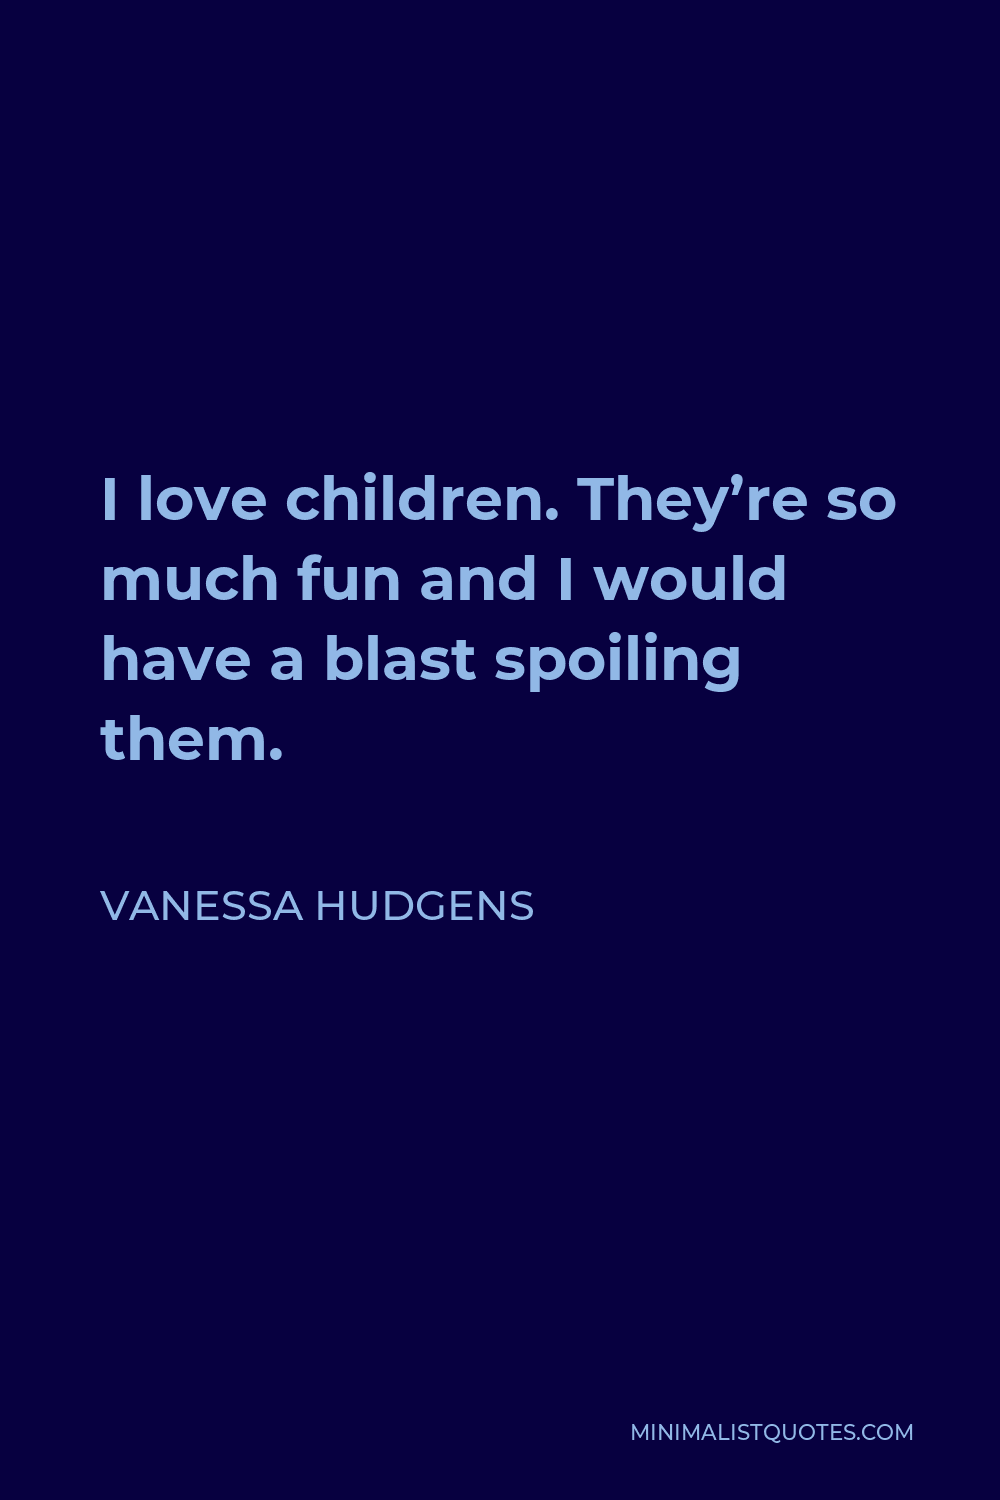 Vanessa Hudgens Quote - I love children. They’re so much fun and I would have a blast spoiling them.